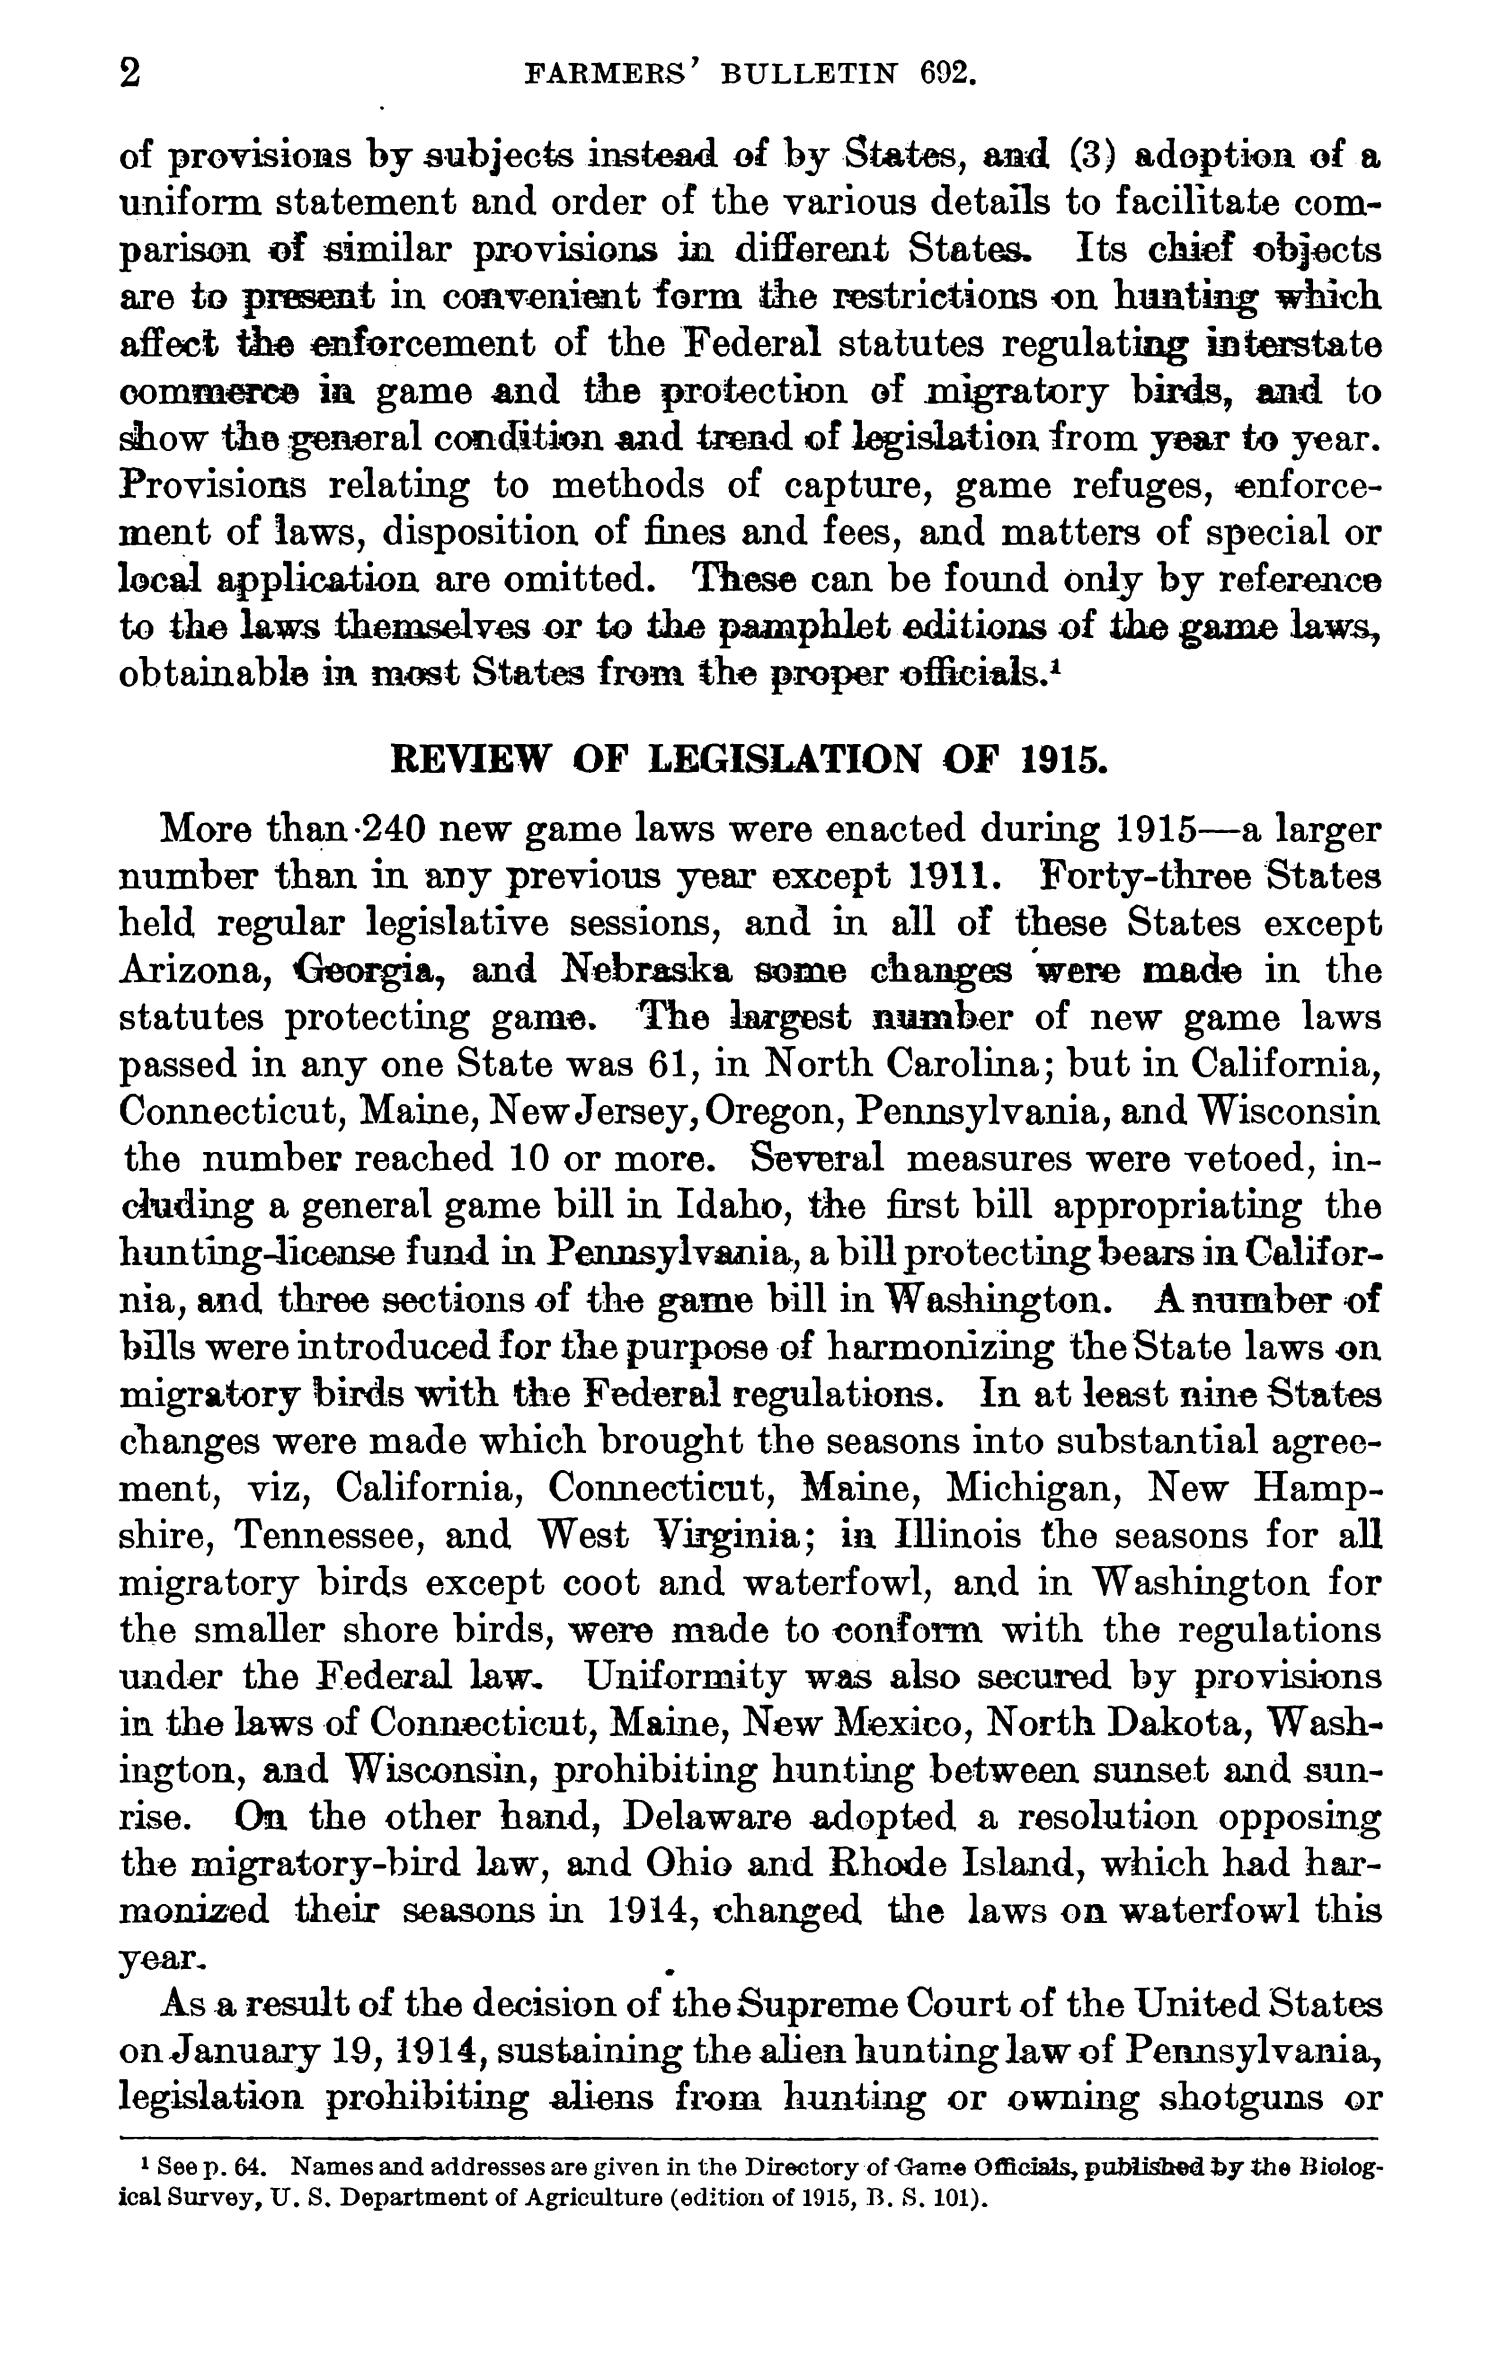 Games Laws for 1915: A Summary of the Provisions Relating to Seasons, Export, Sale, Limits, and Licenses
                                                
                                                    2
                                                